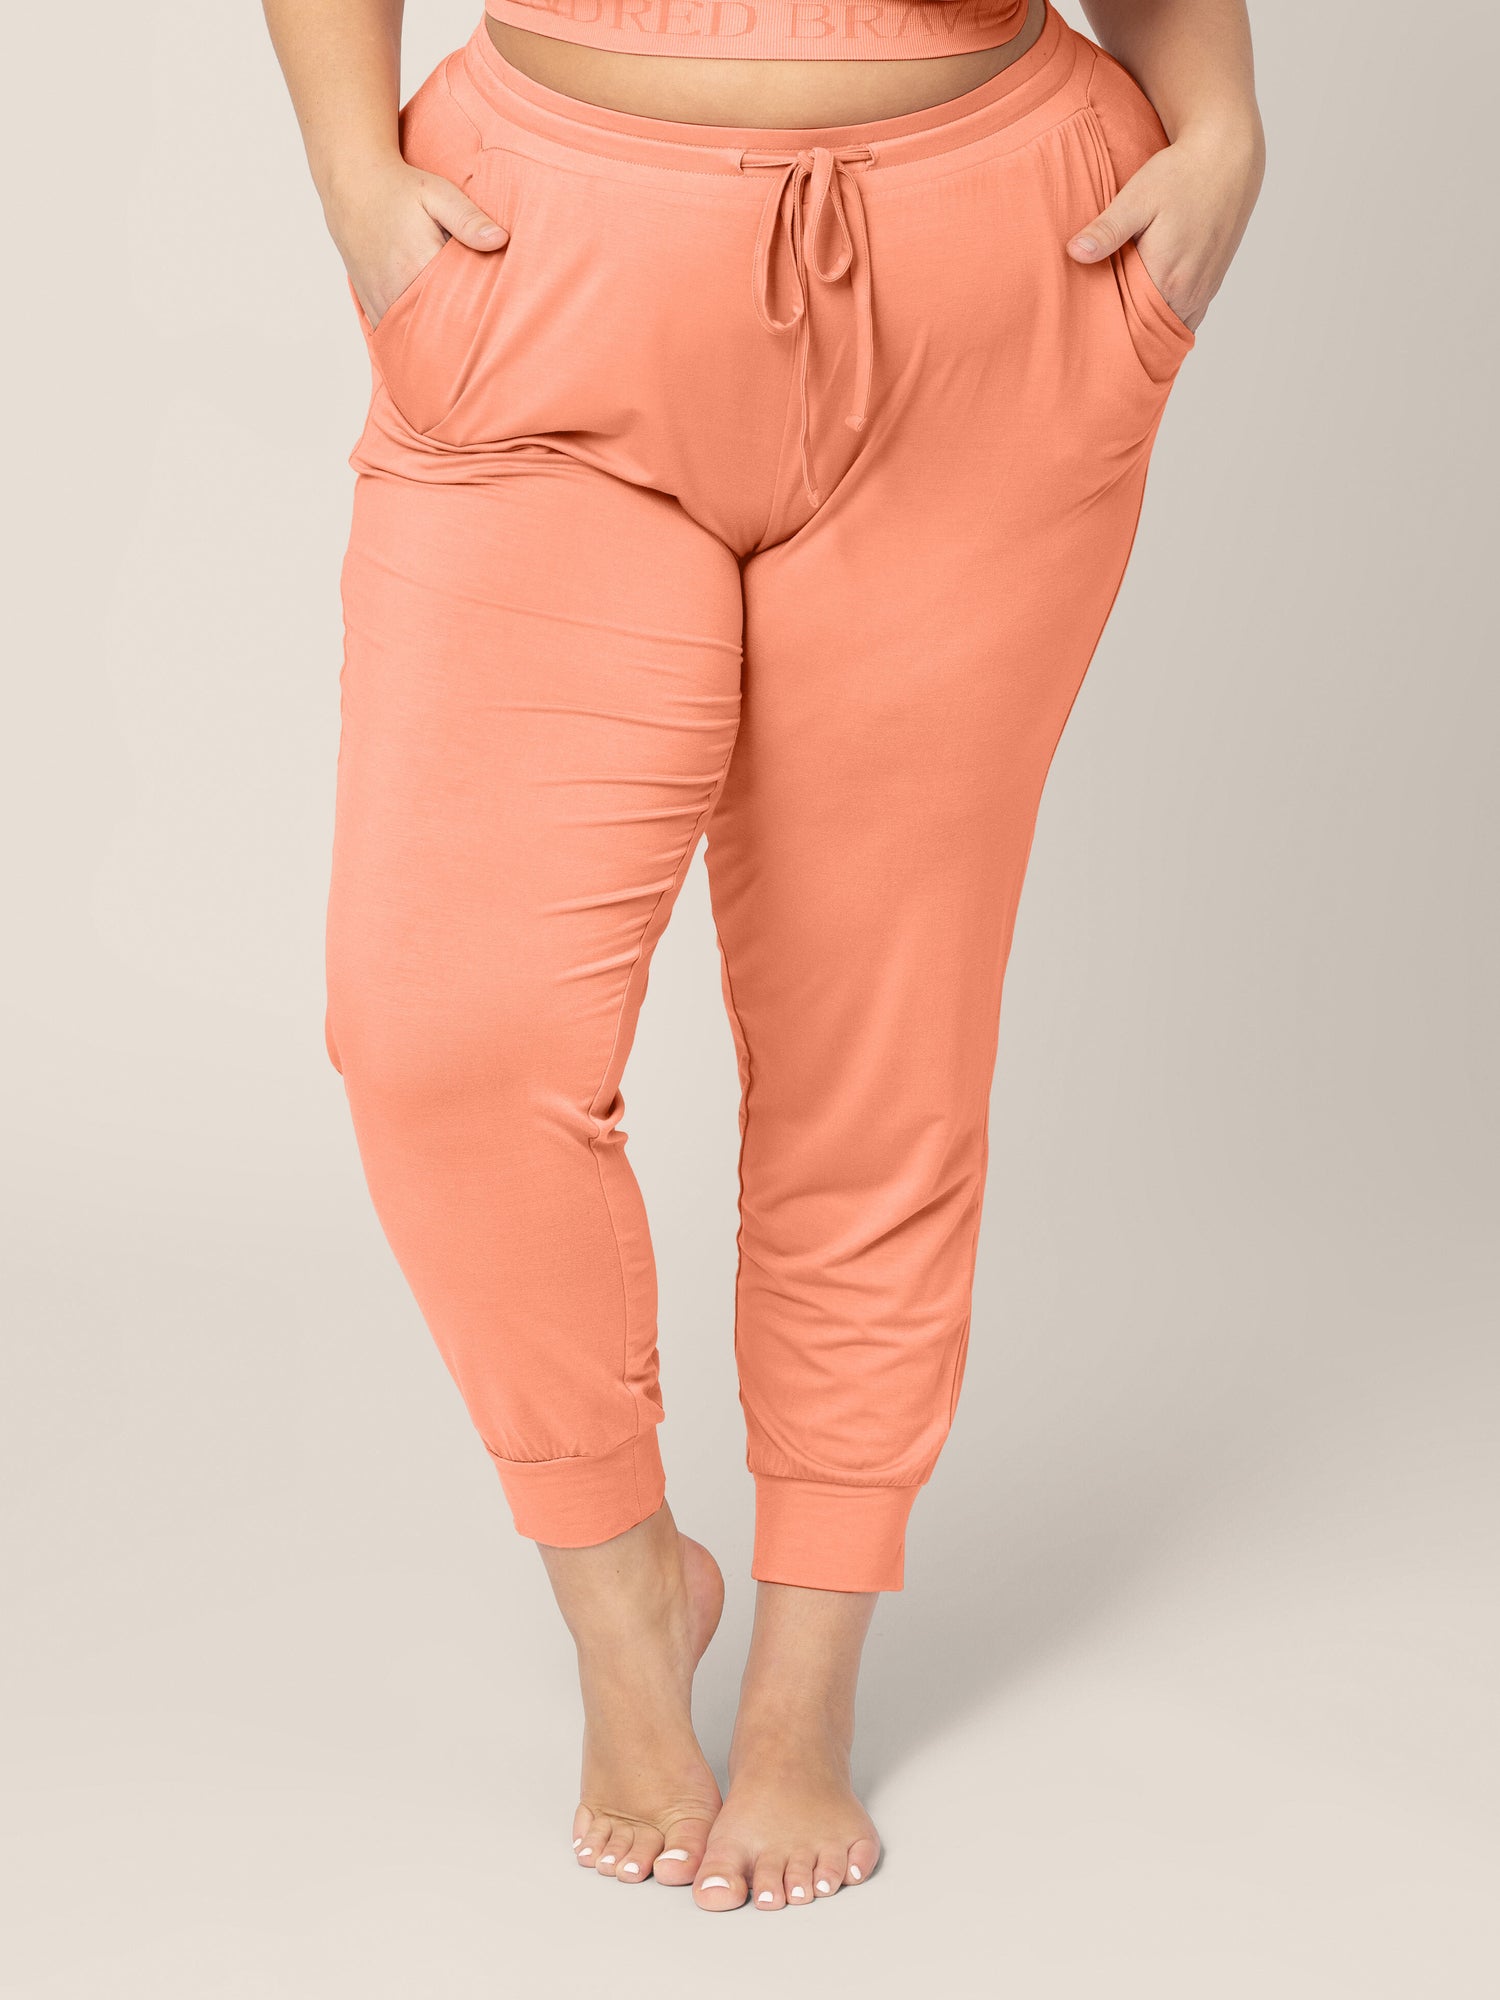 Front view of the bottom half of a model wearing the Everyday Lounge Joggers in Vintage Coral @model_info:Lauren is 5'6" and wearing an X-Large Regular.